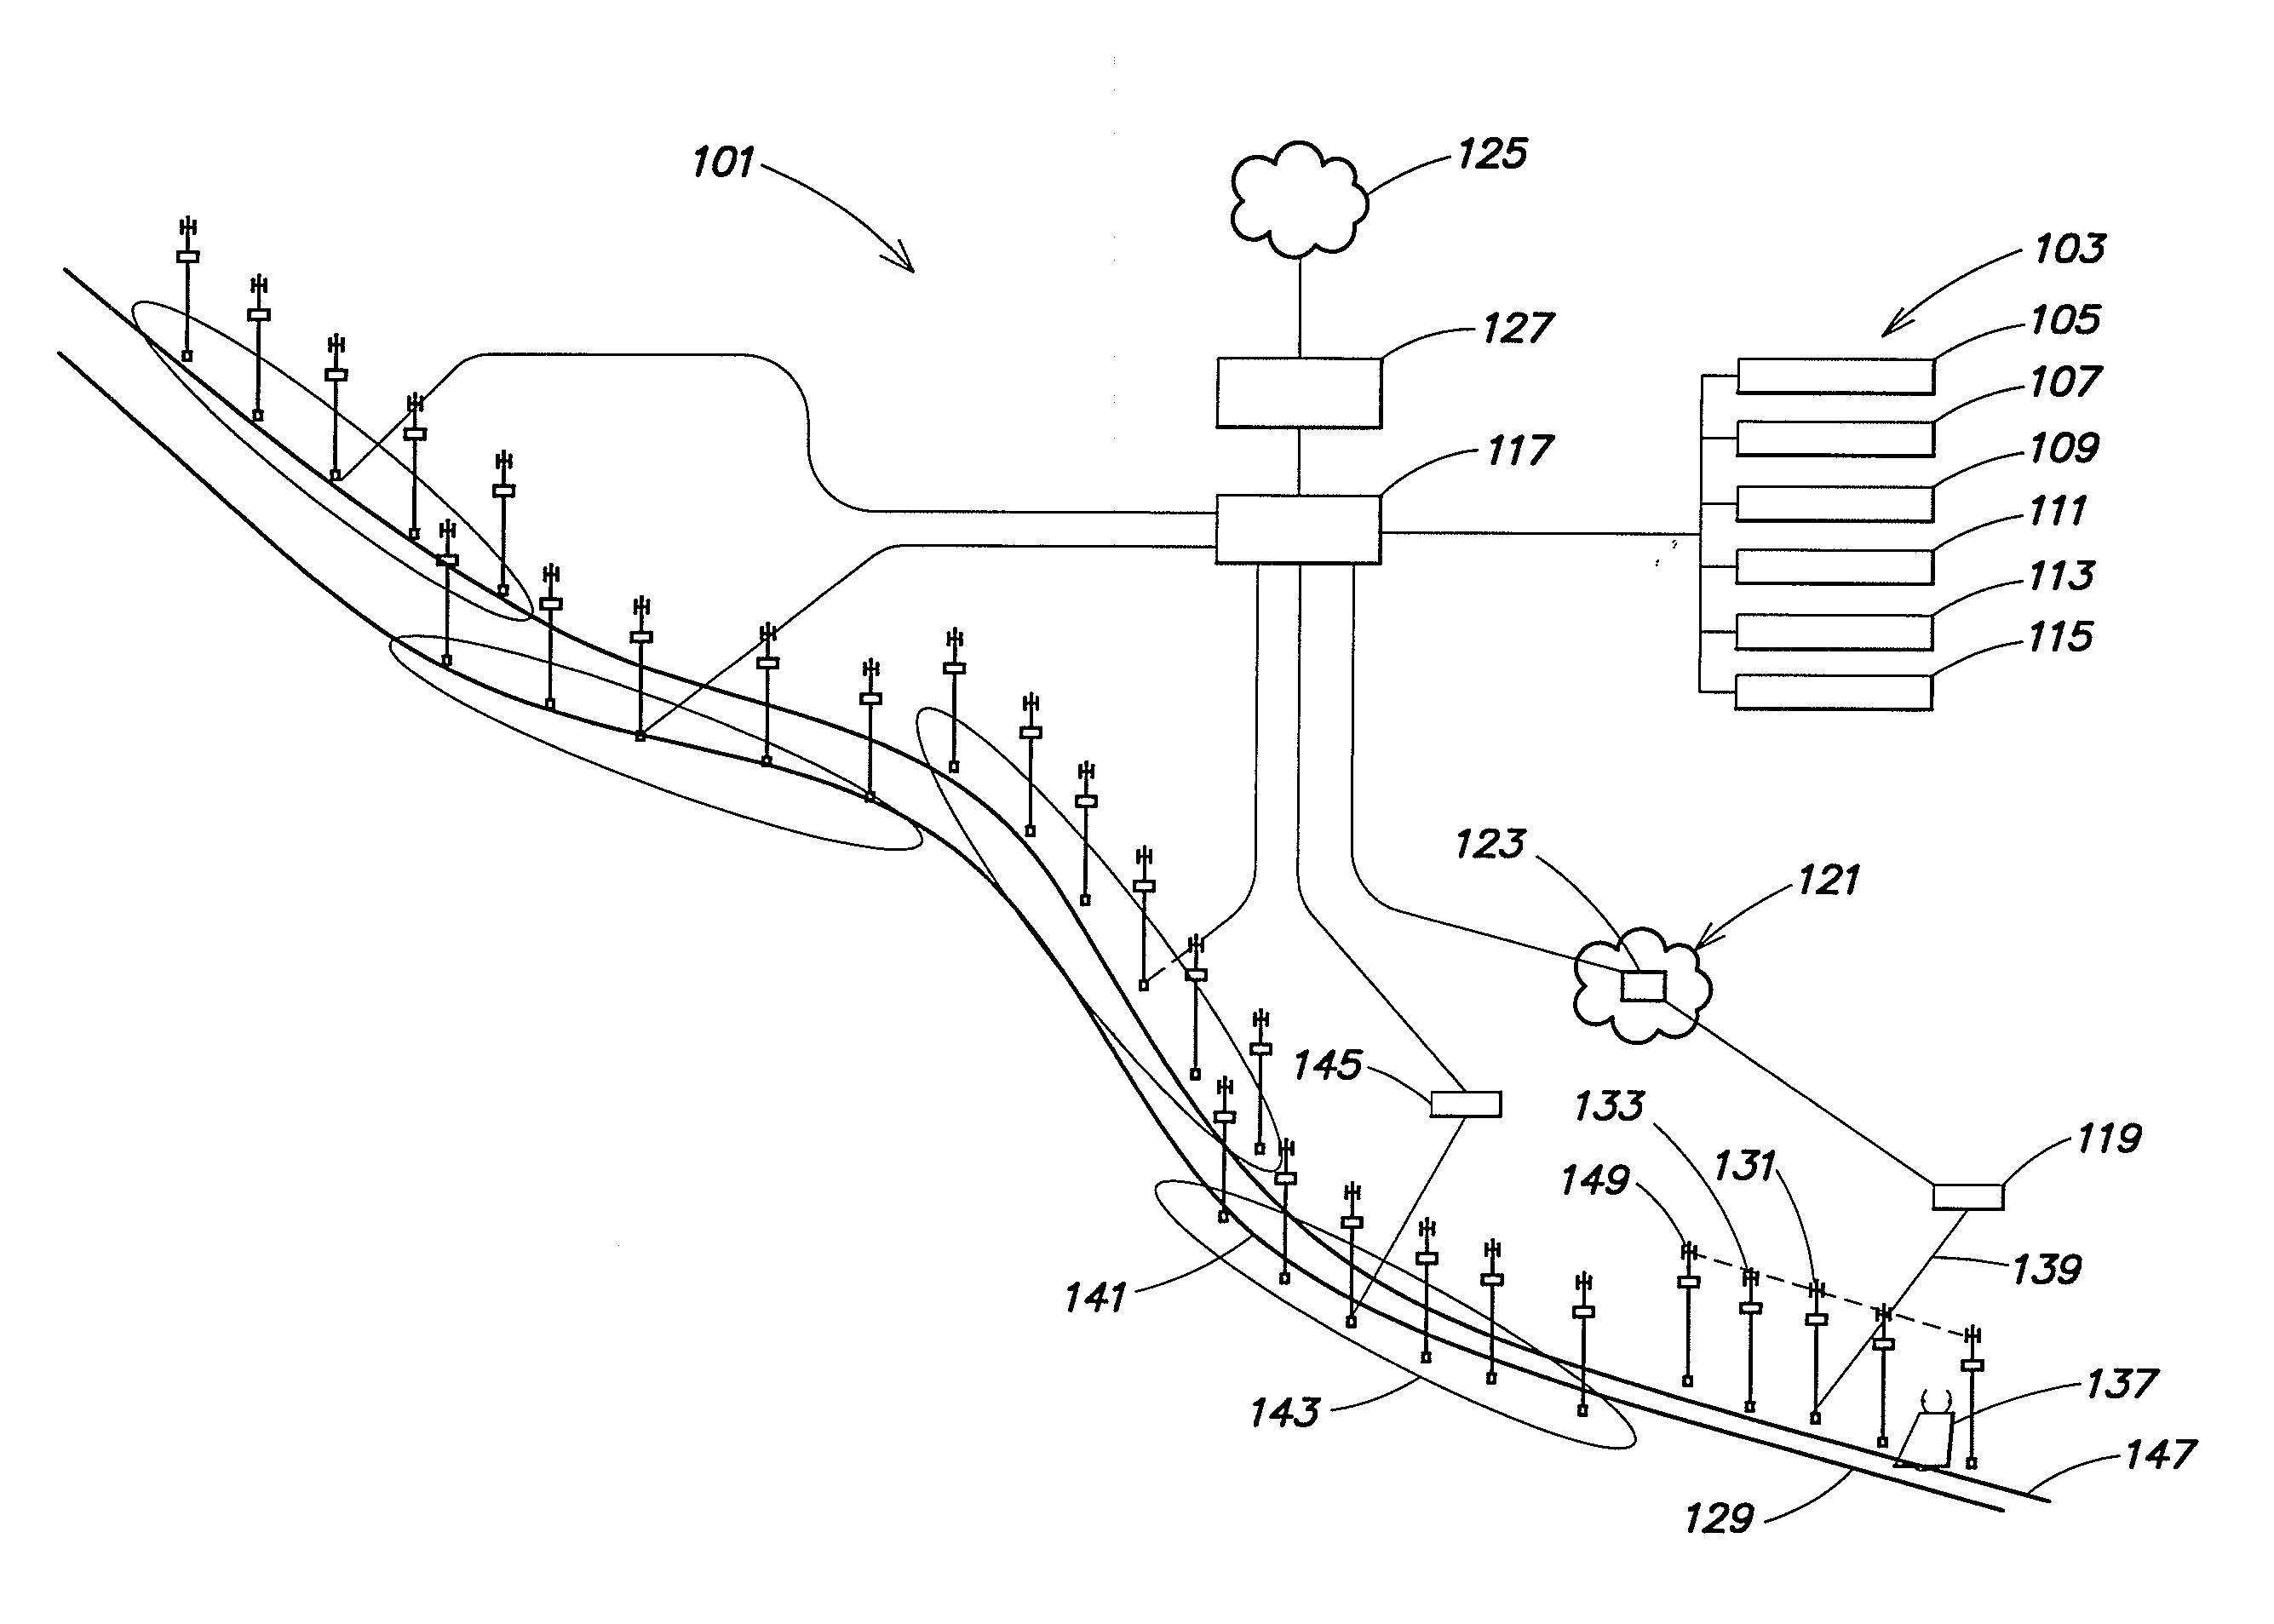 System and method of authenticating mobile devices